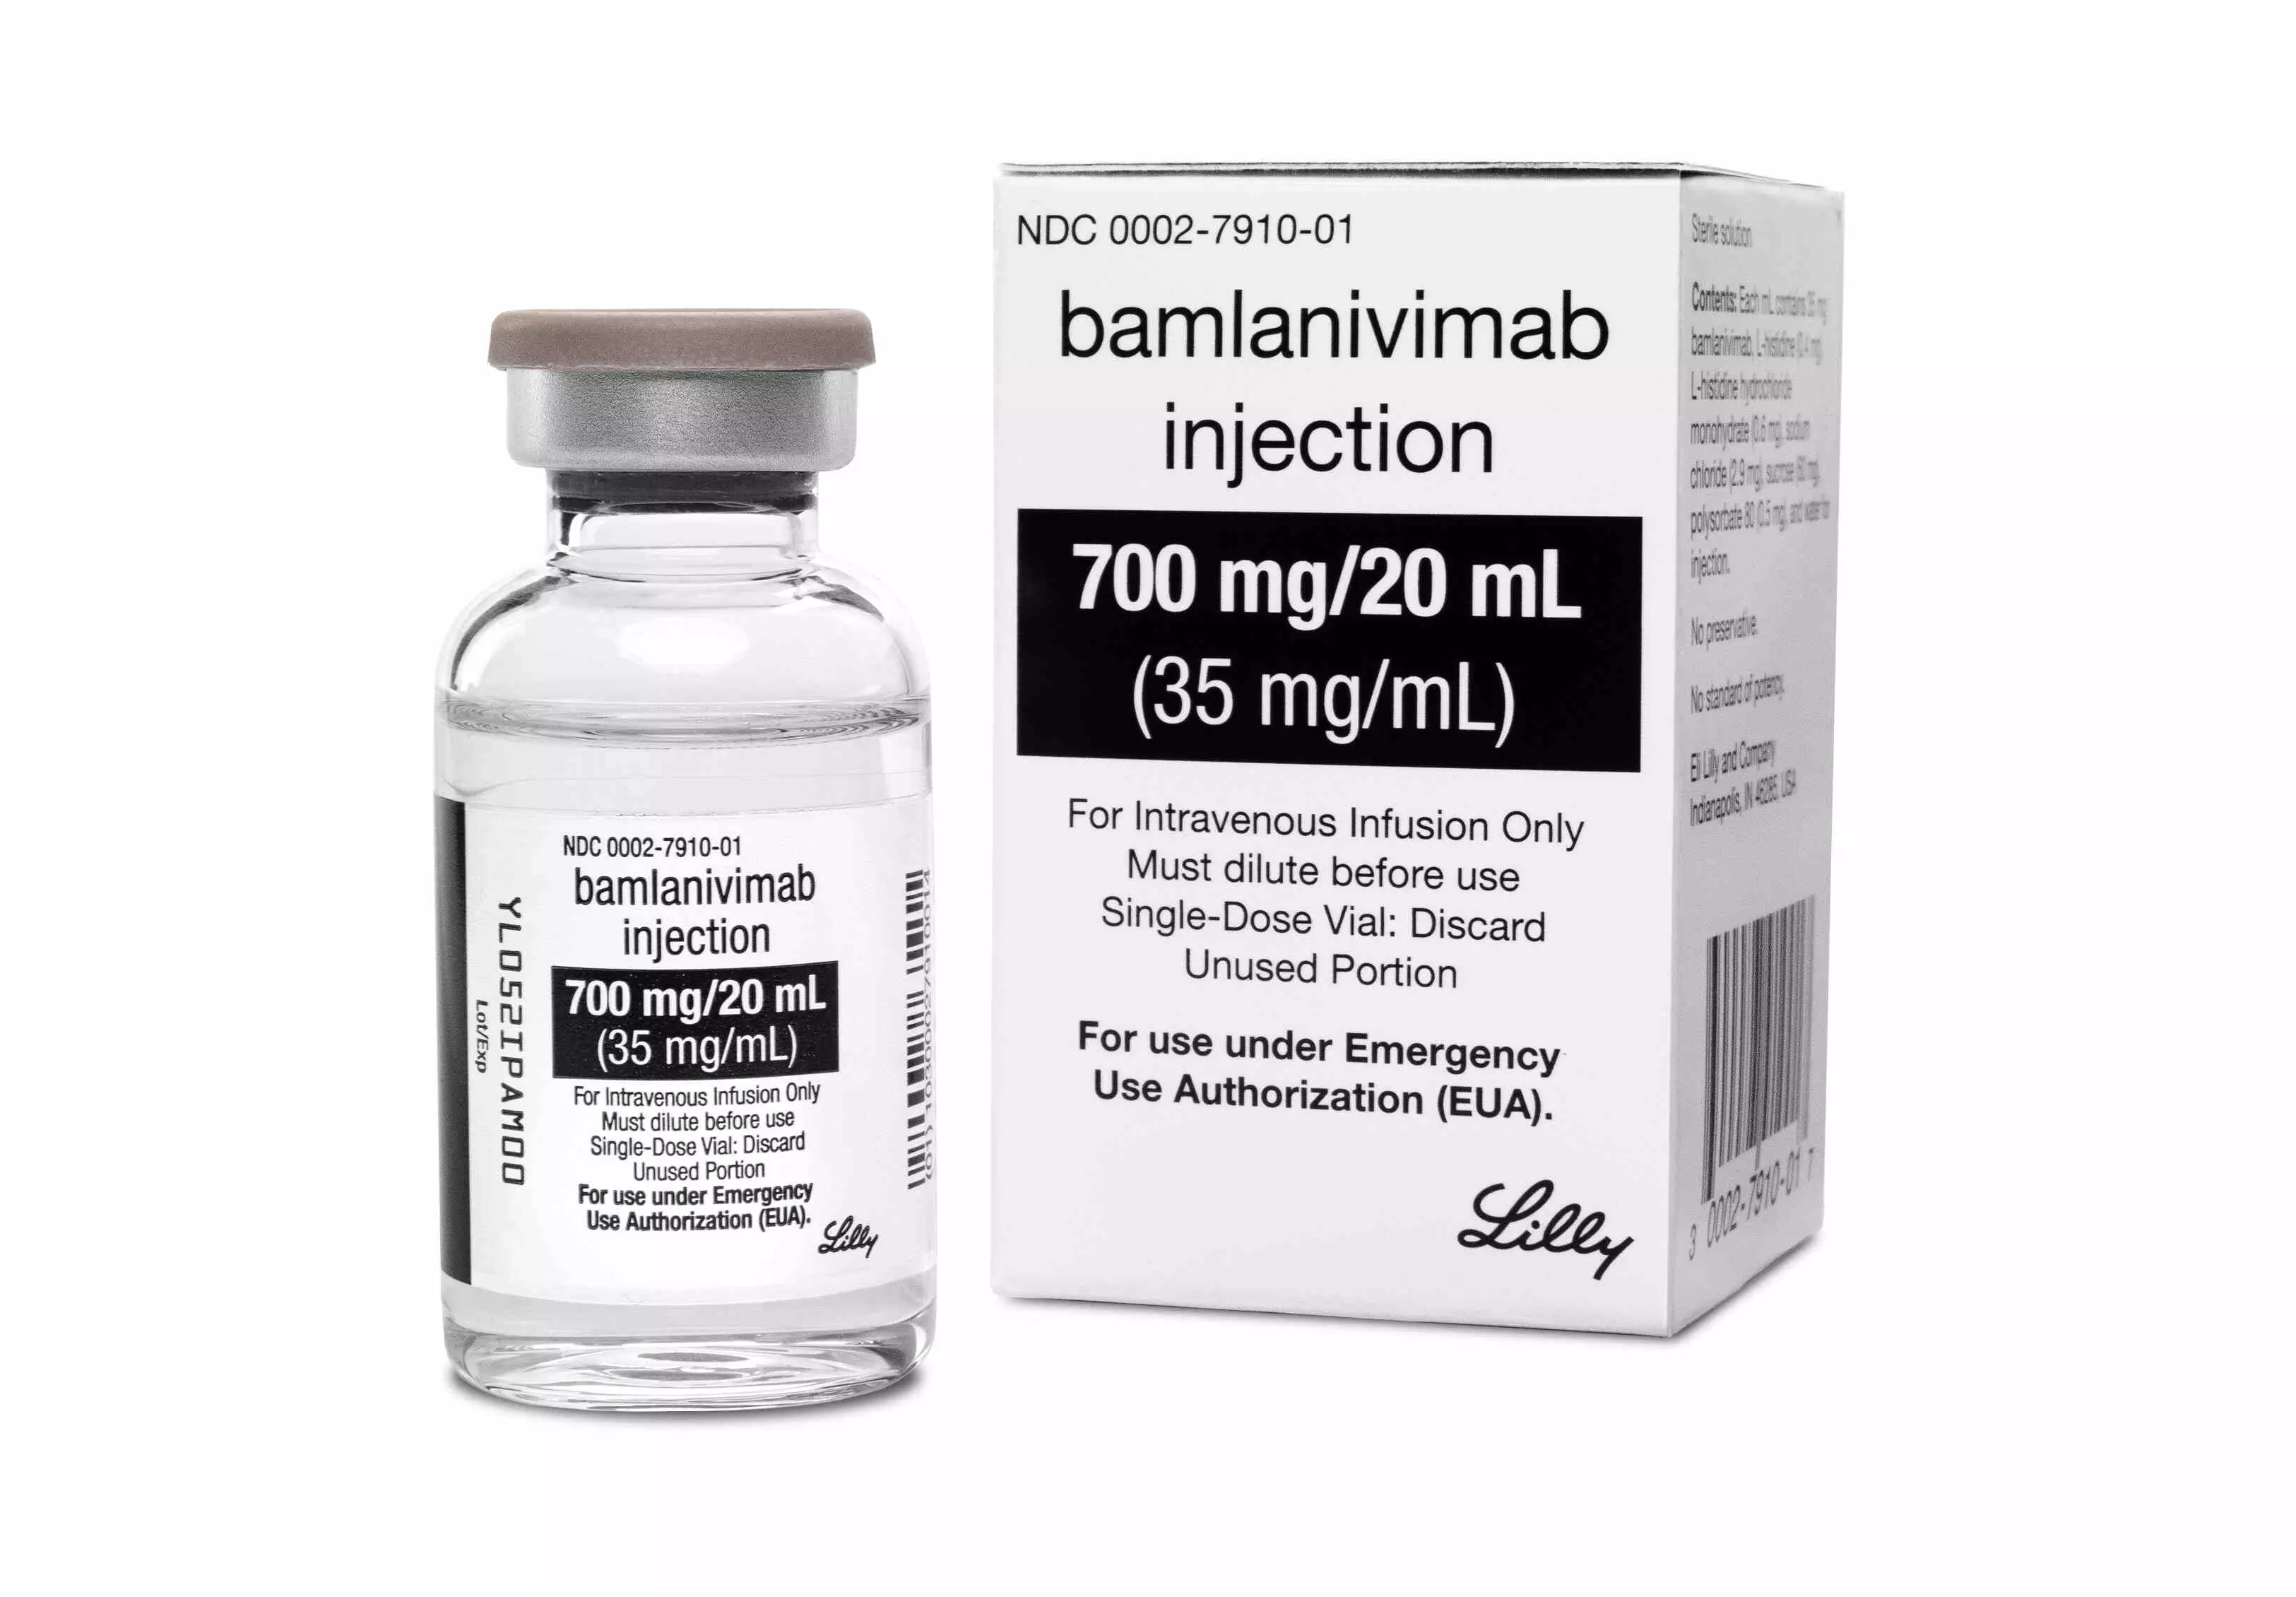 Bamlanivimab may help prevent COVID-19 infection, finds JAMA study